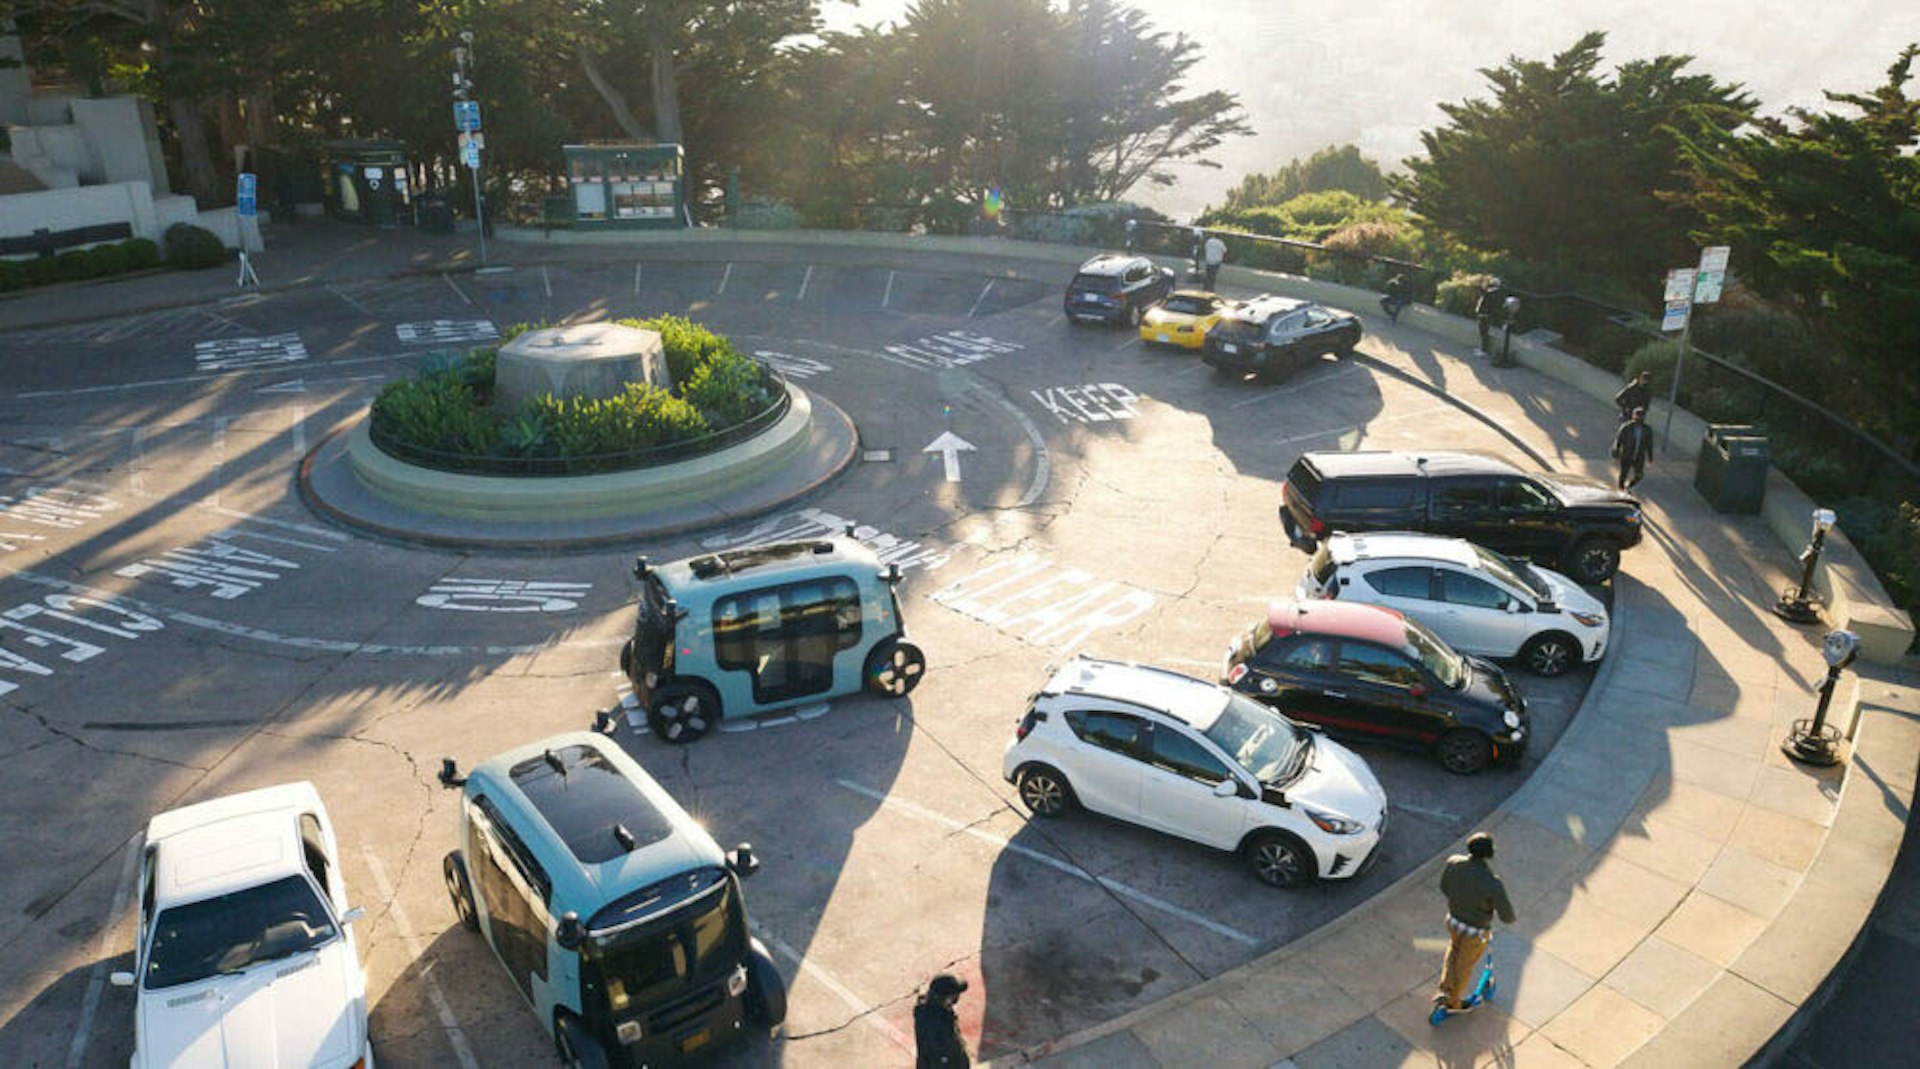 zoox robotaxi driving in a parking lot with cars in san francisco